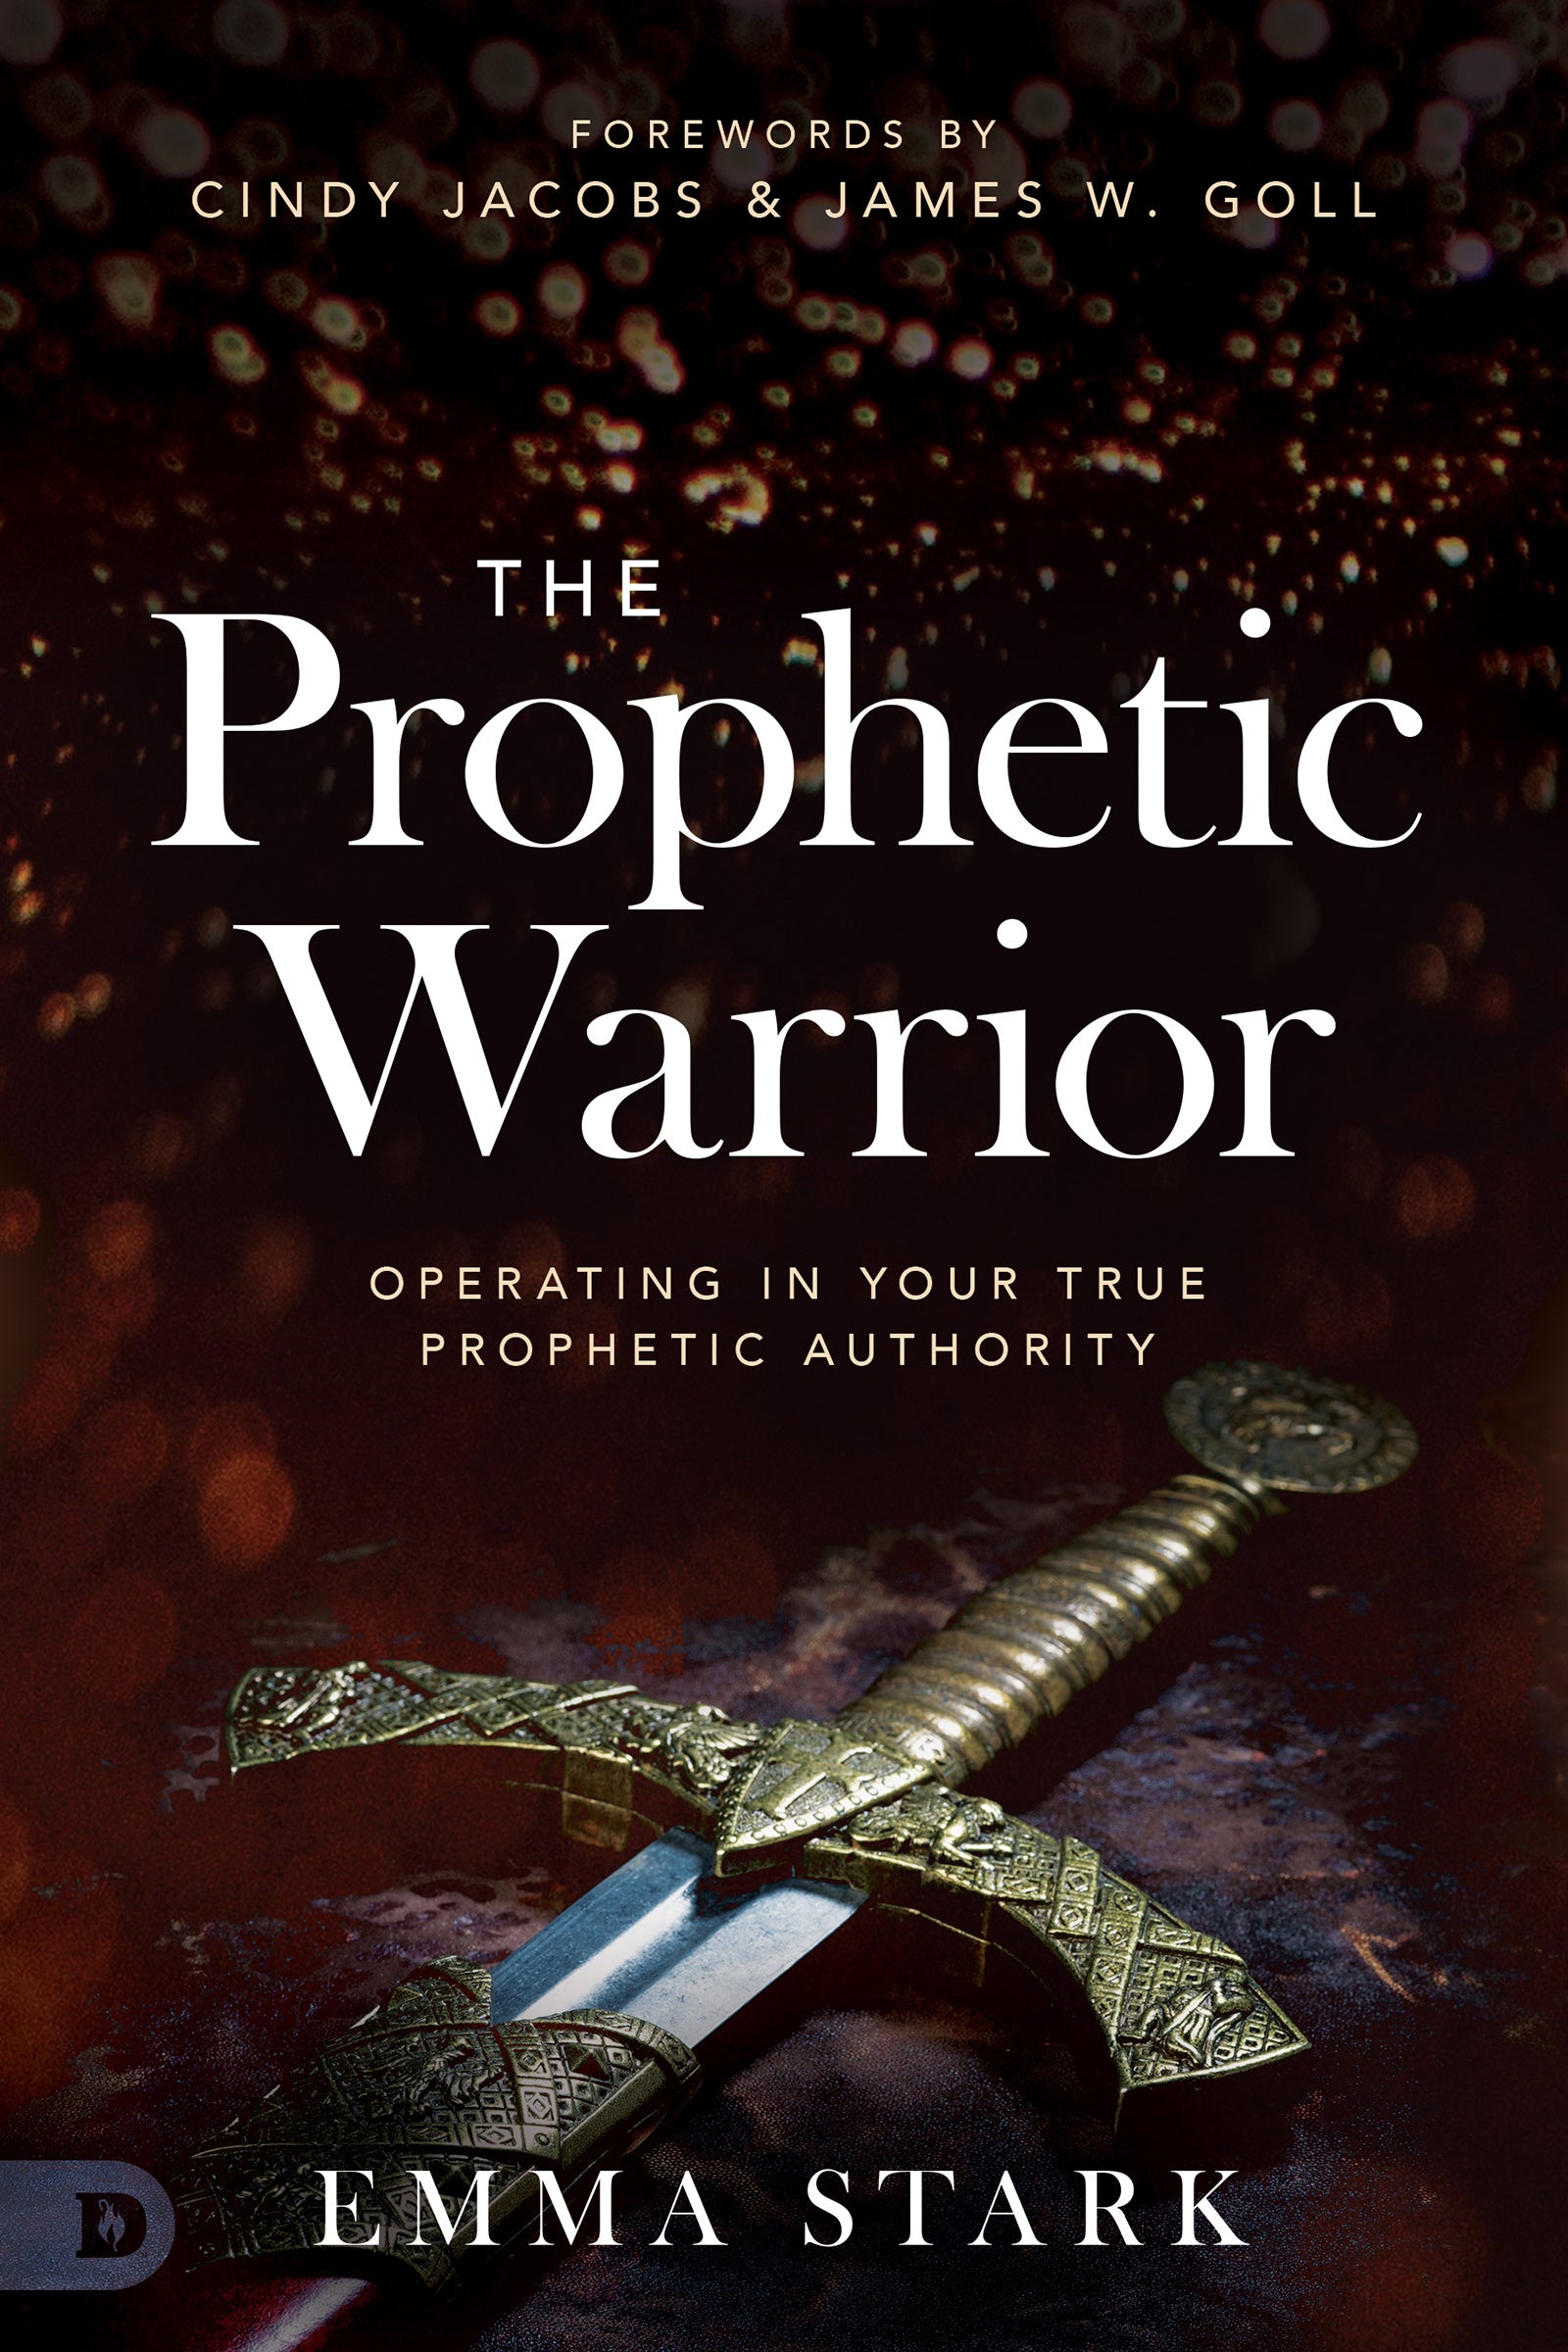 Image of The Prophetic Warrior other